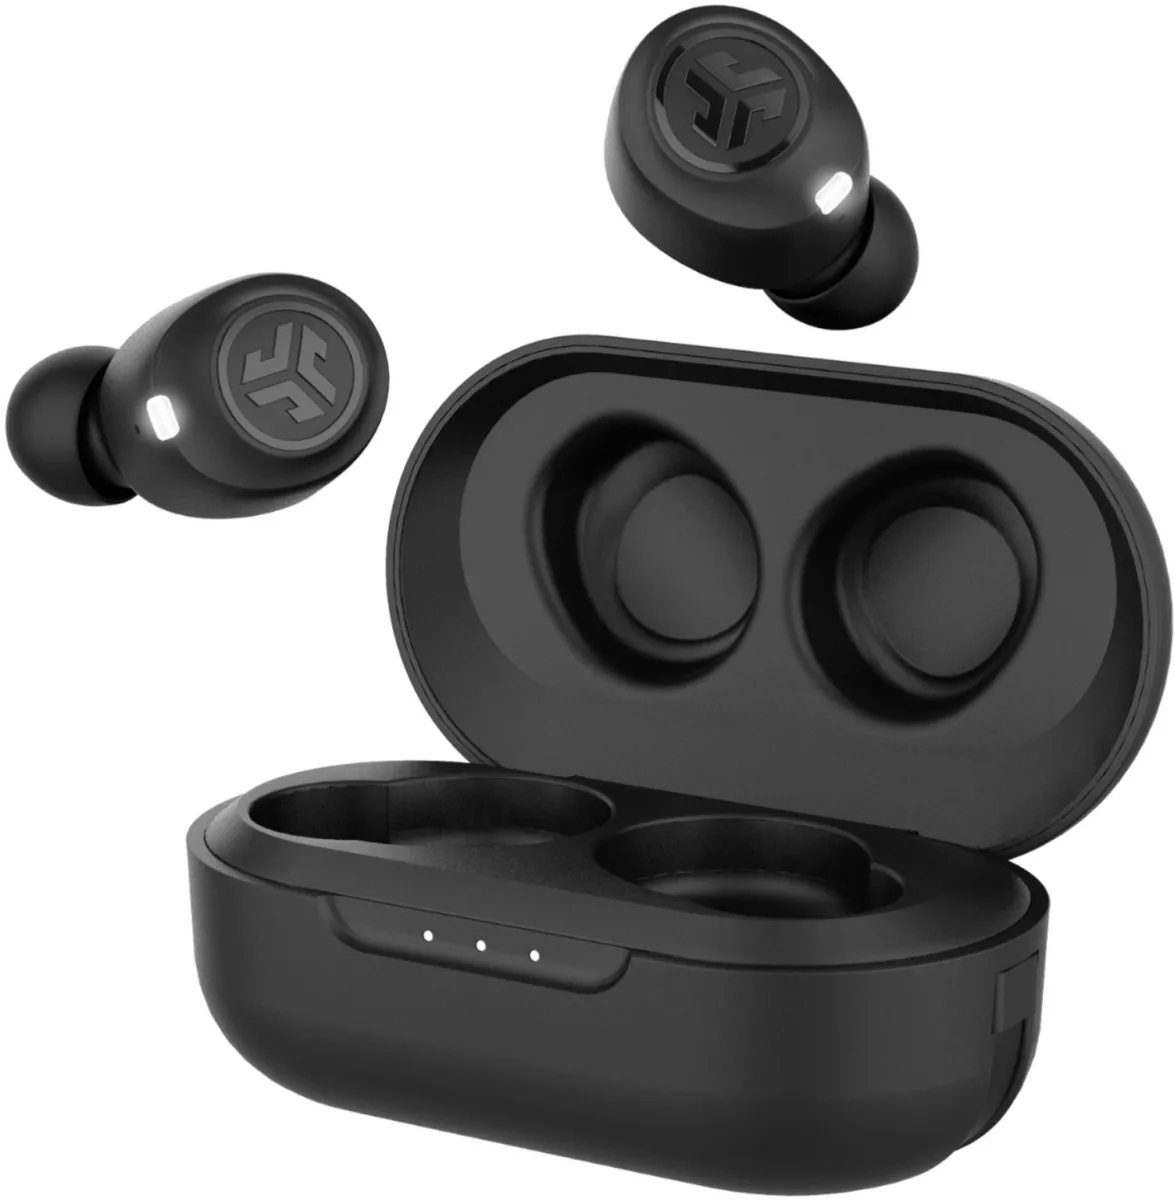 How to Pair Your JLab Earbuds 1